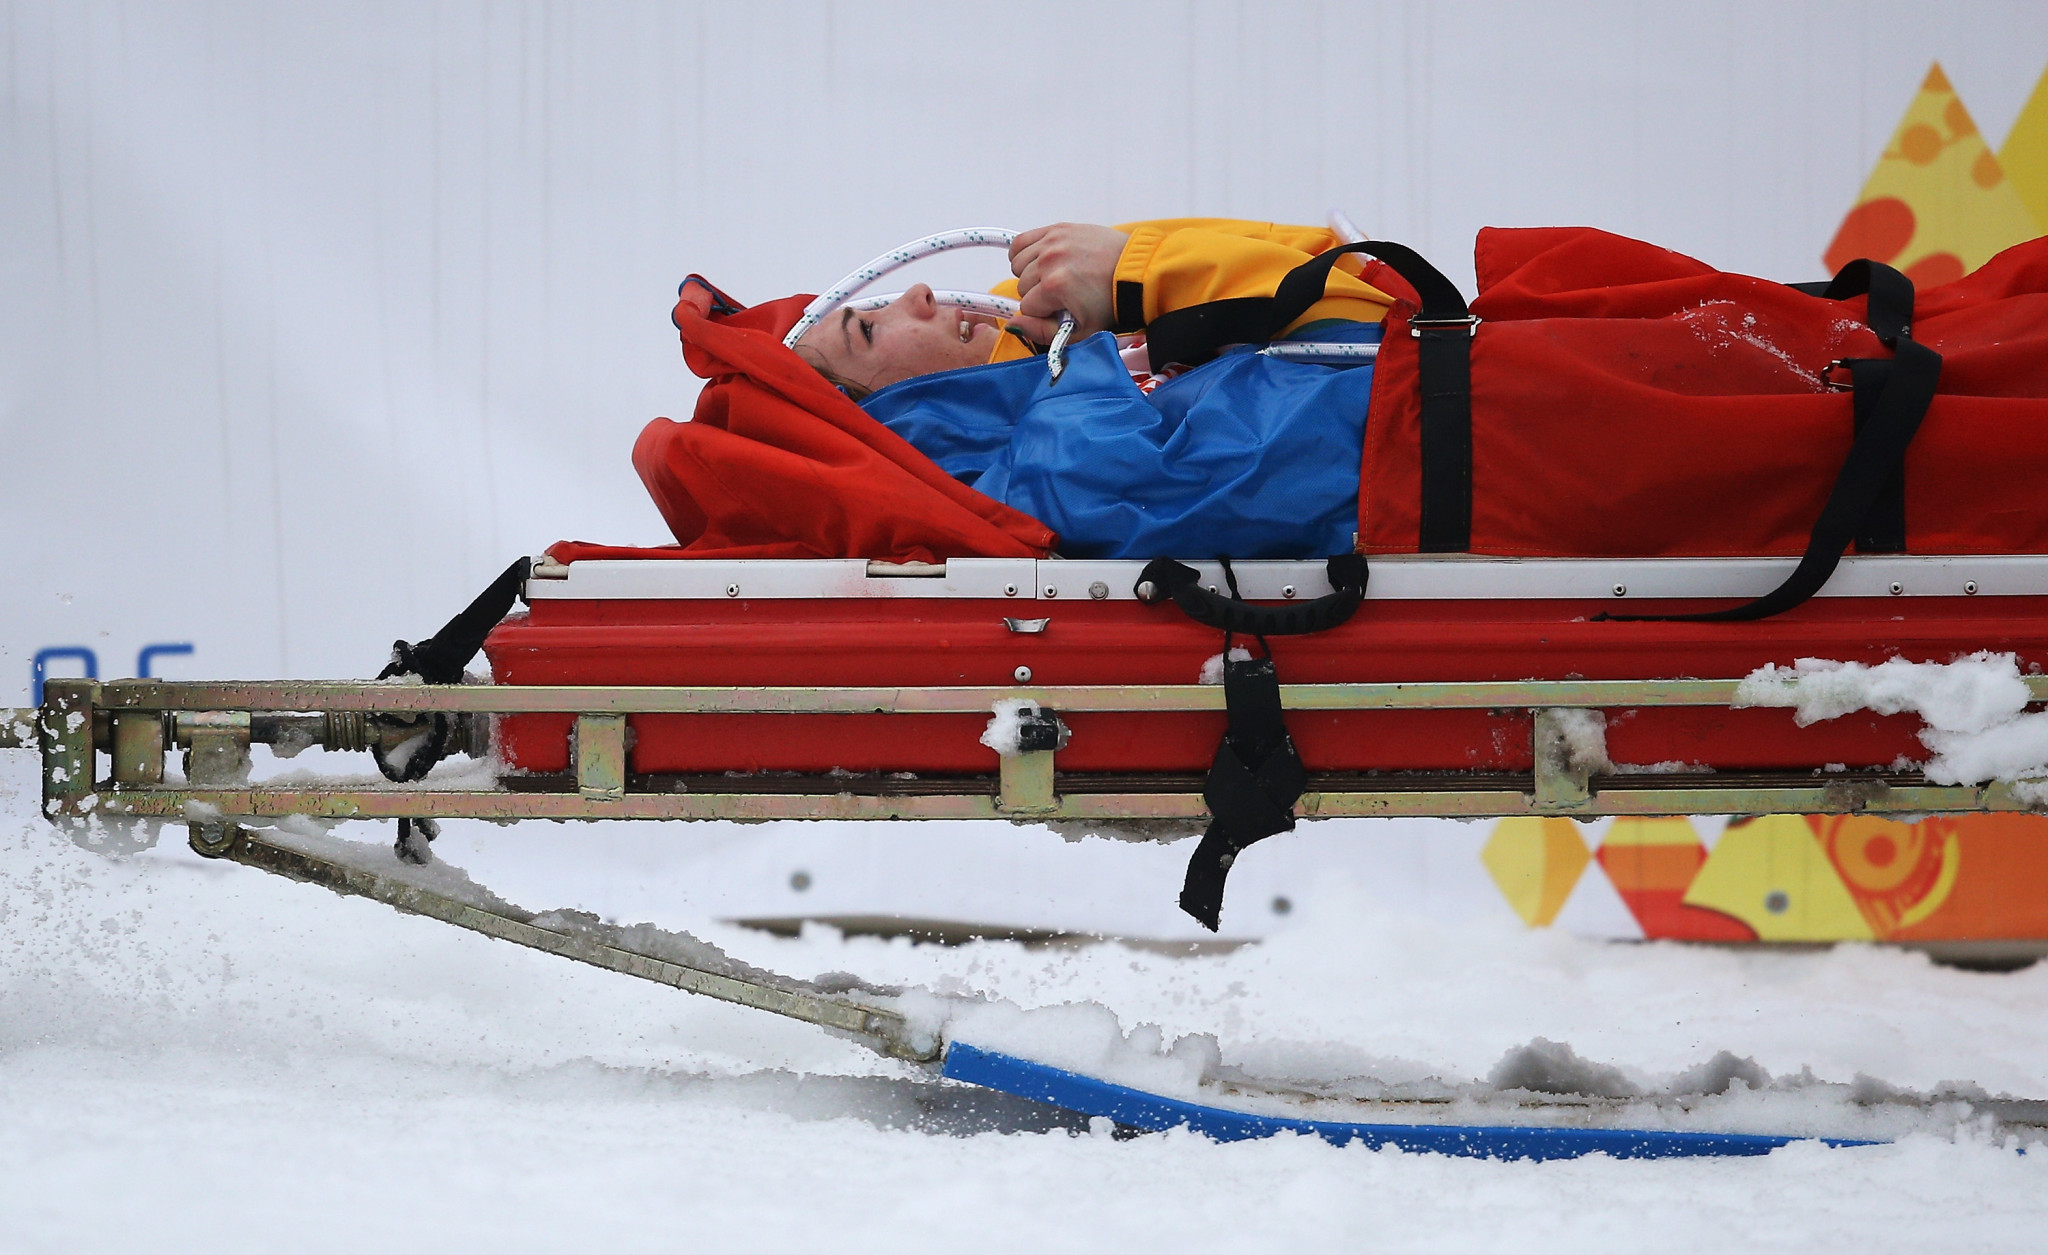 Joany Badenhorst was forced to leave the 2014 Paralympic Games in Sochi on a stretcher ©Getty Images